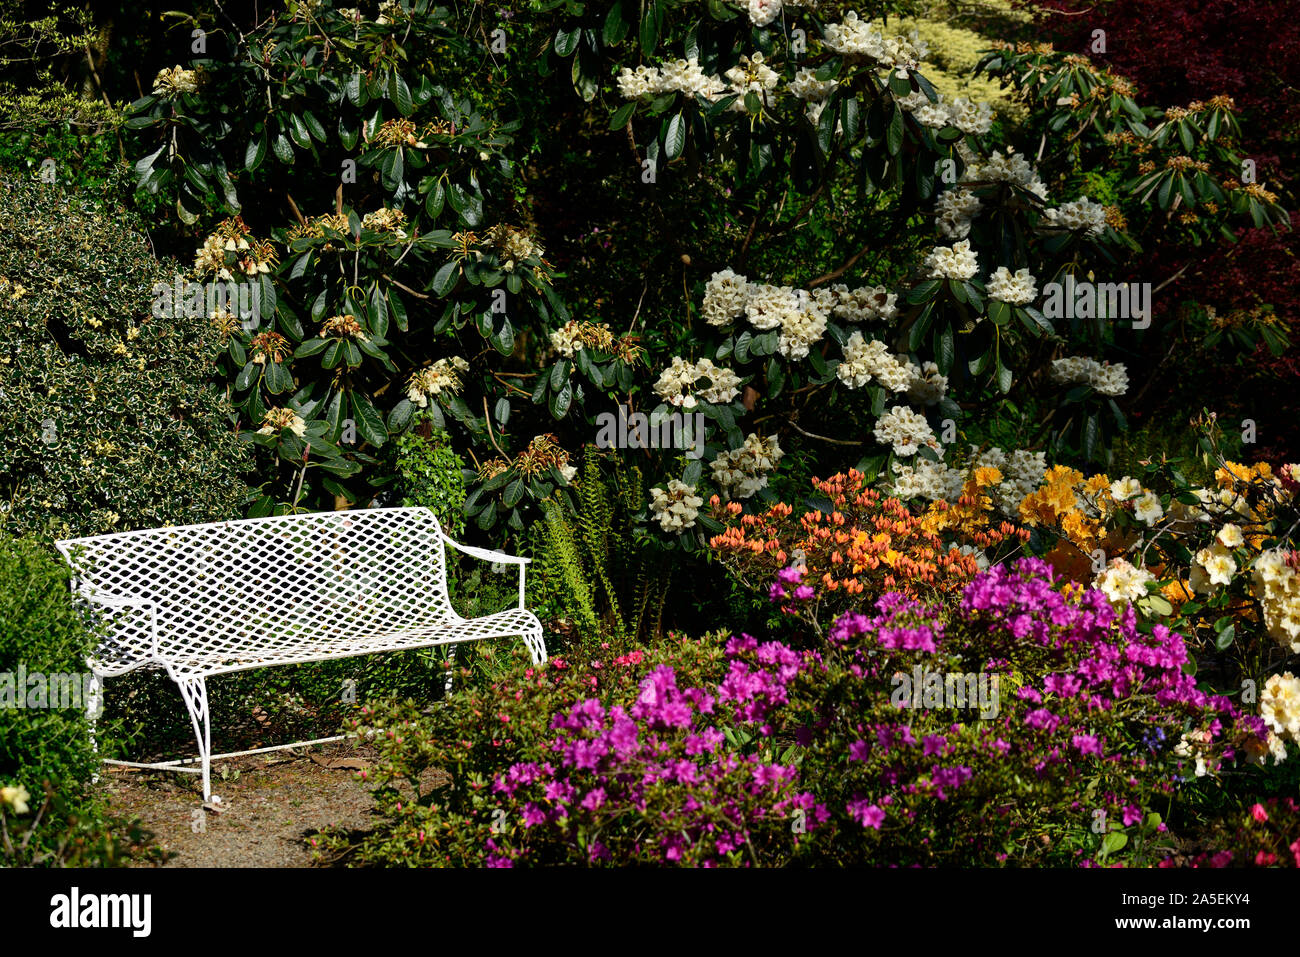 white metal seat,seating,bench,spring,rhododendrons,azaleas,white,pink,orange,flower,flowers,flowering,RM Floral Stock Photo